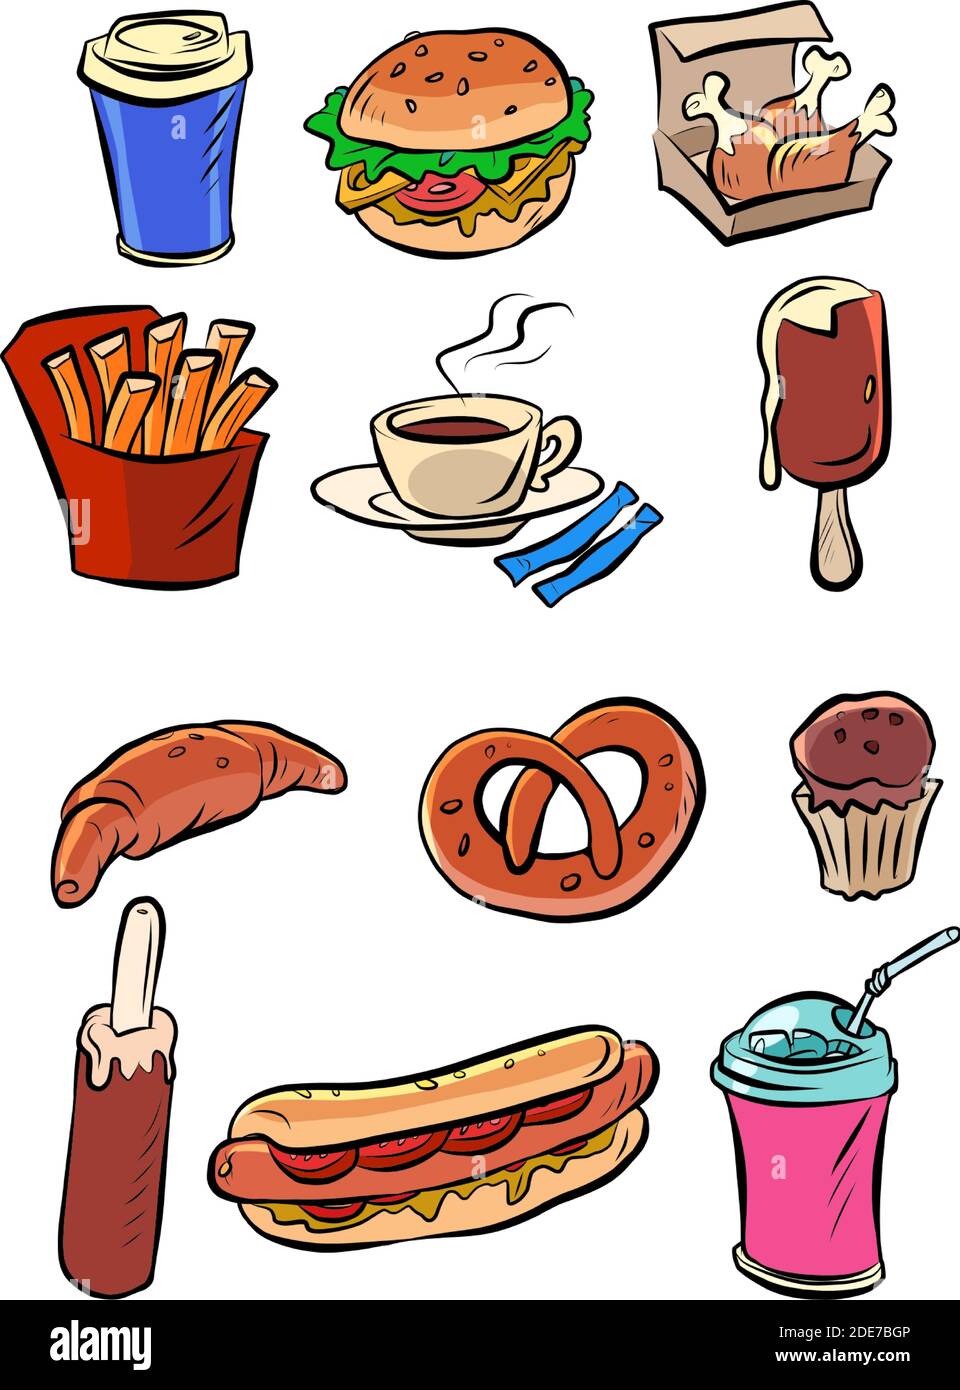 Snacks street food collection set icons symbols Stock Vector